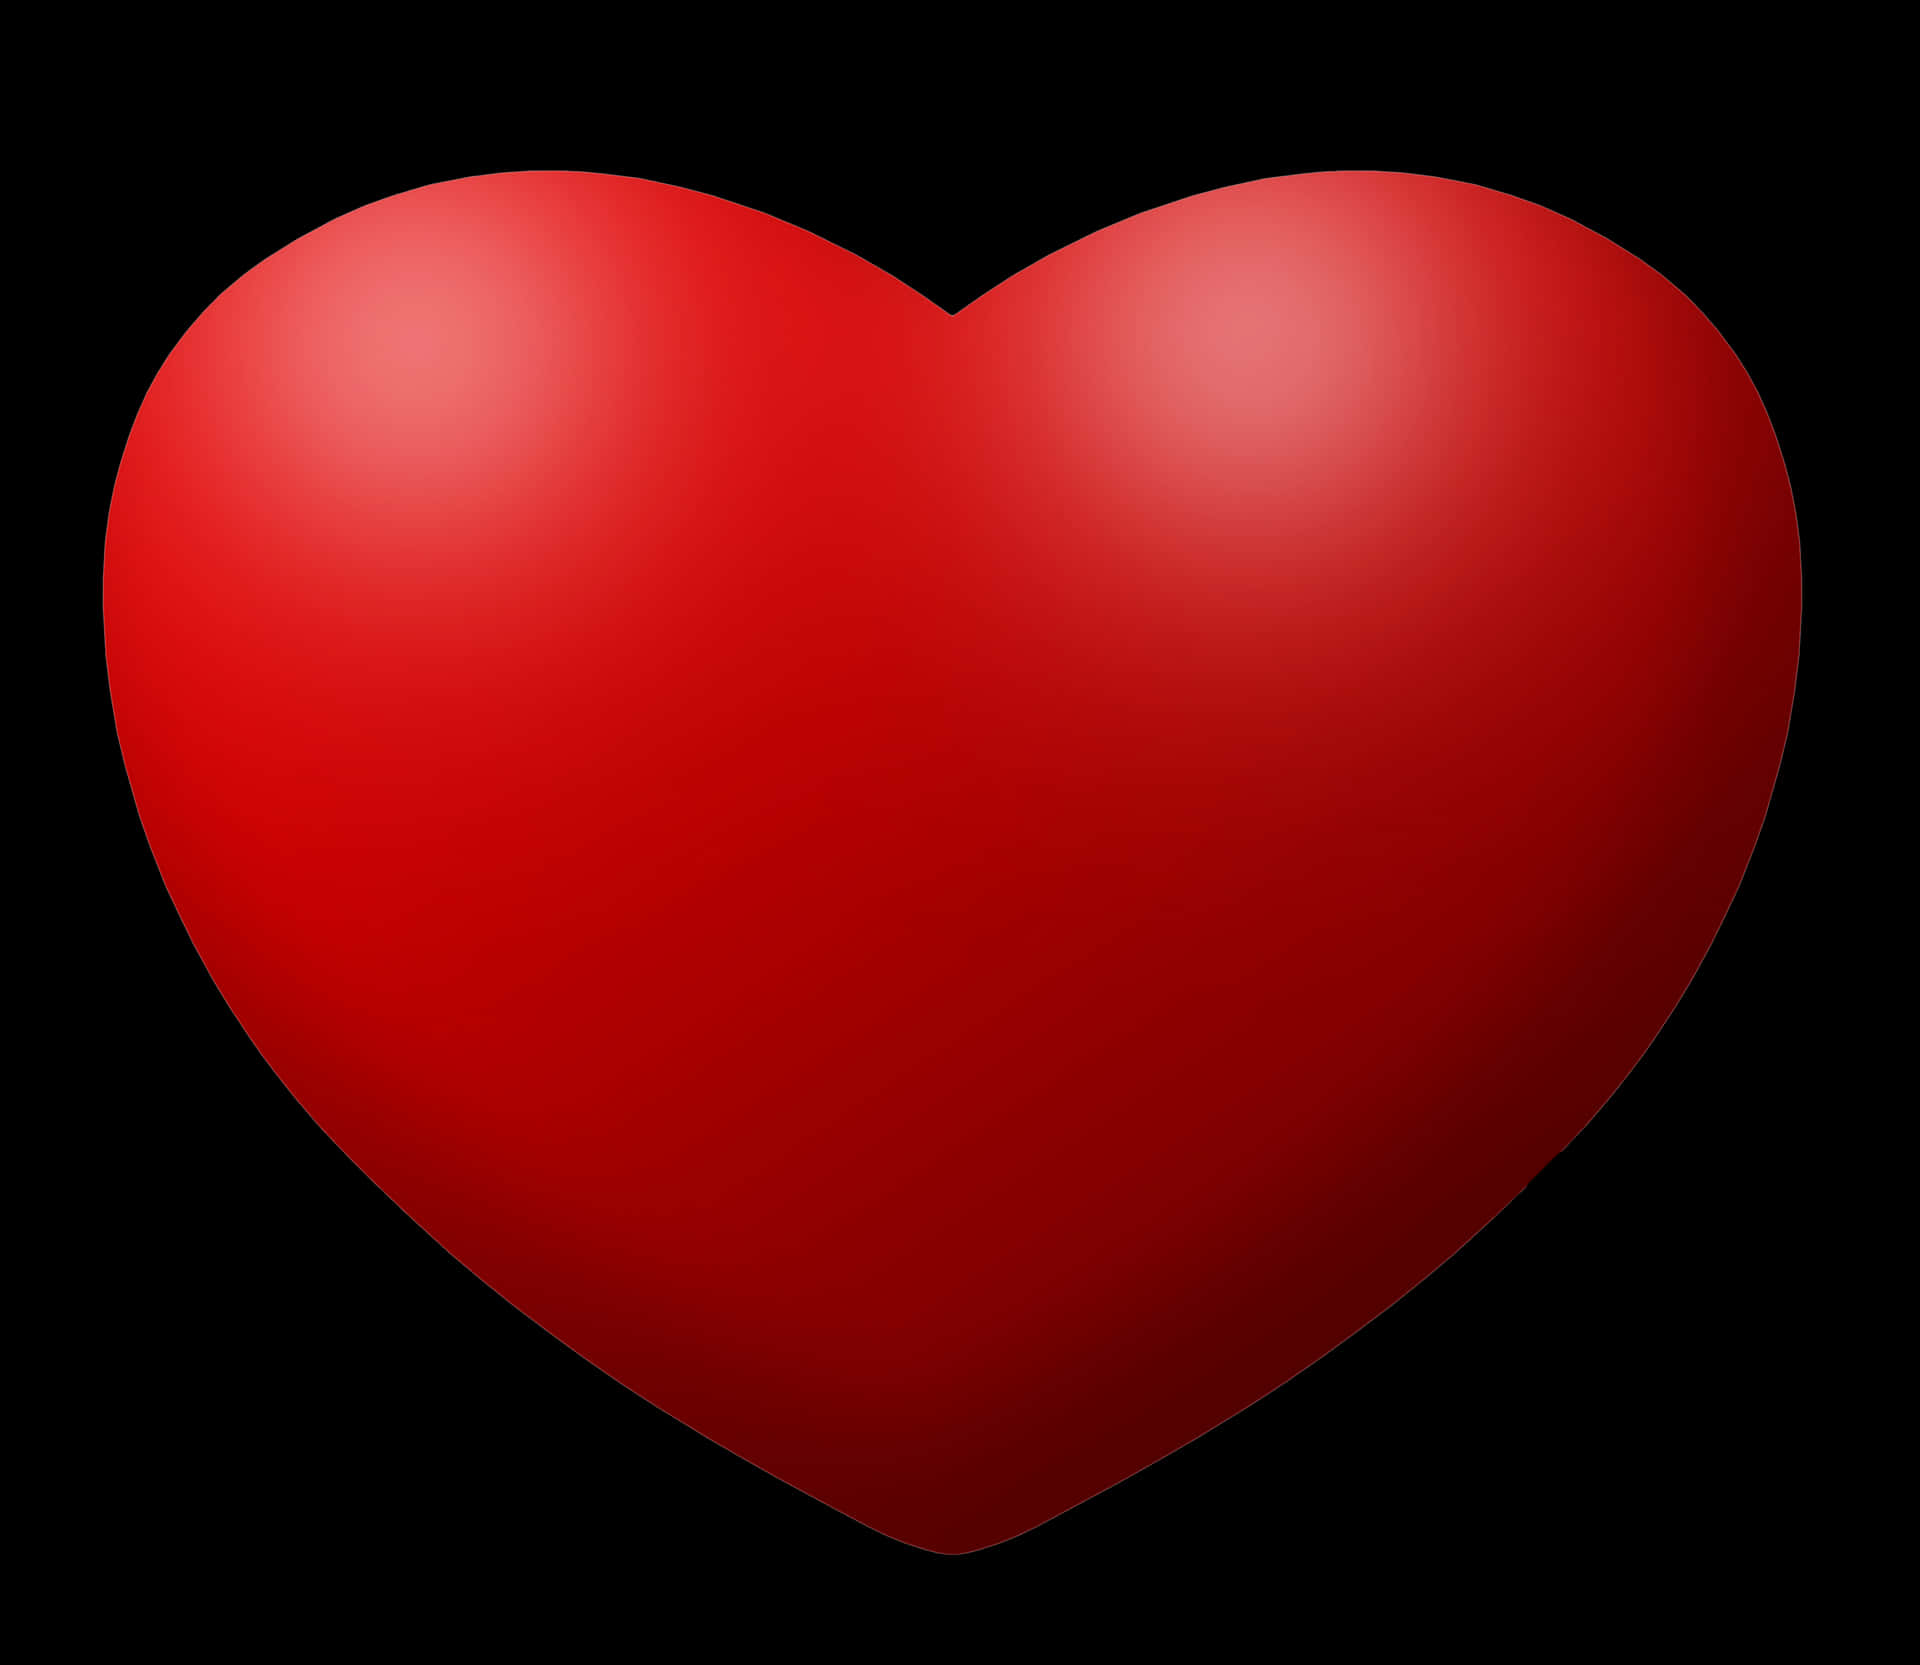 Red Heart Graphicon Black Background PNG